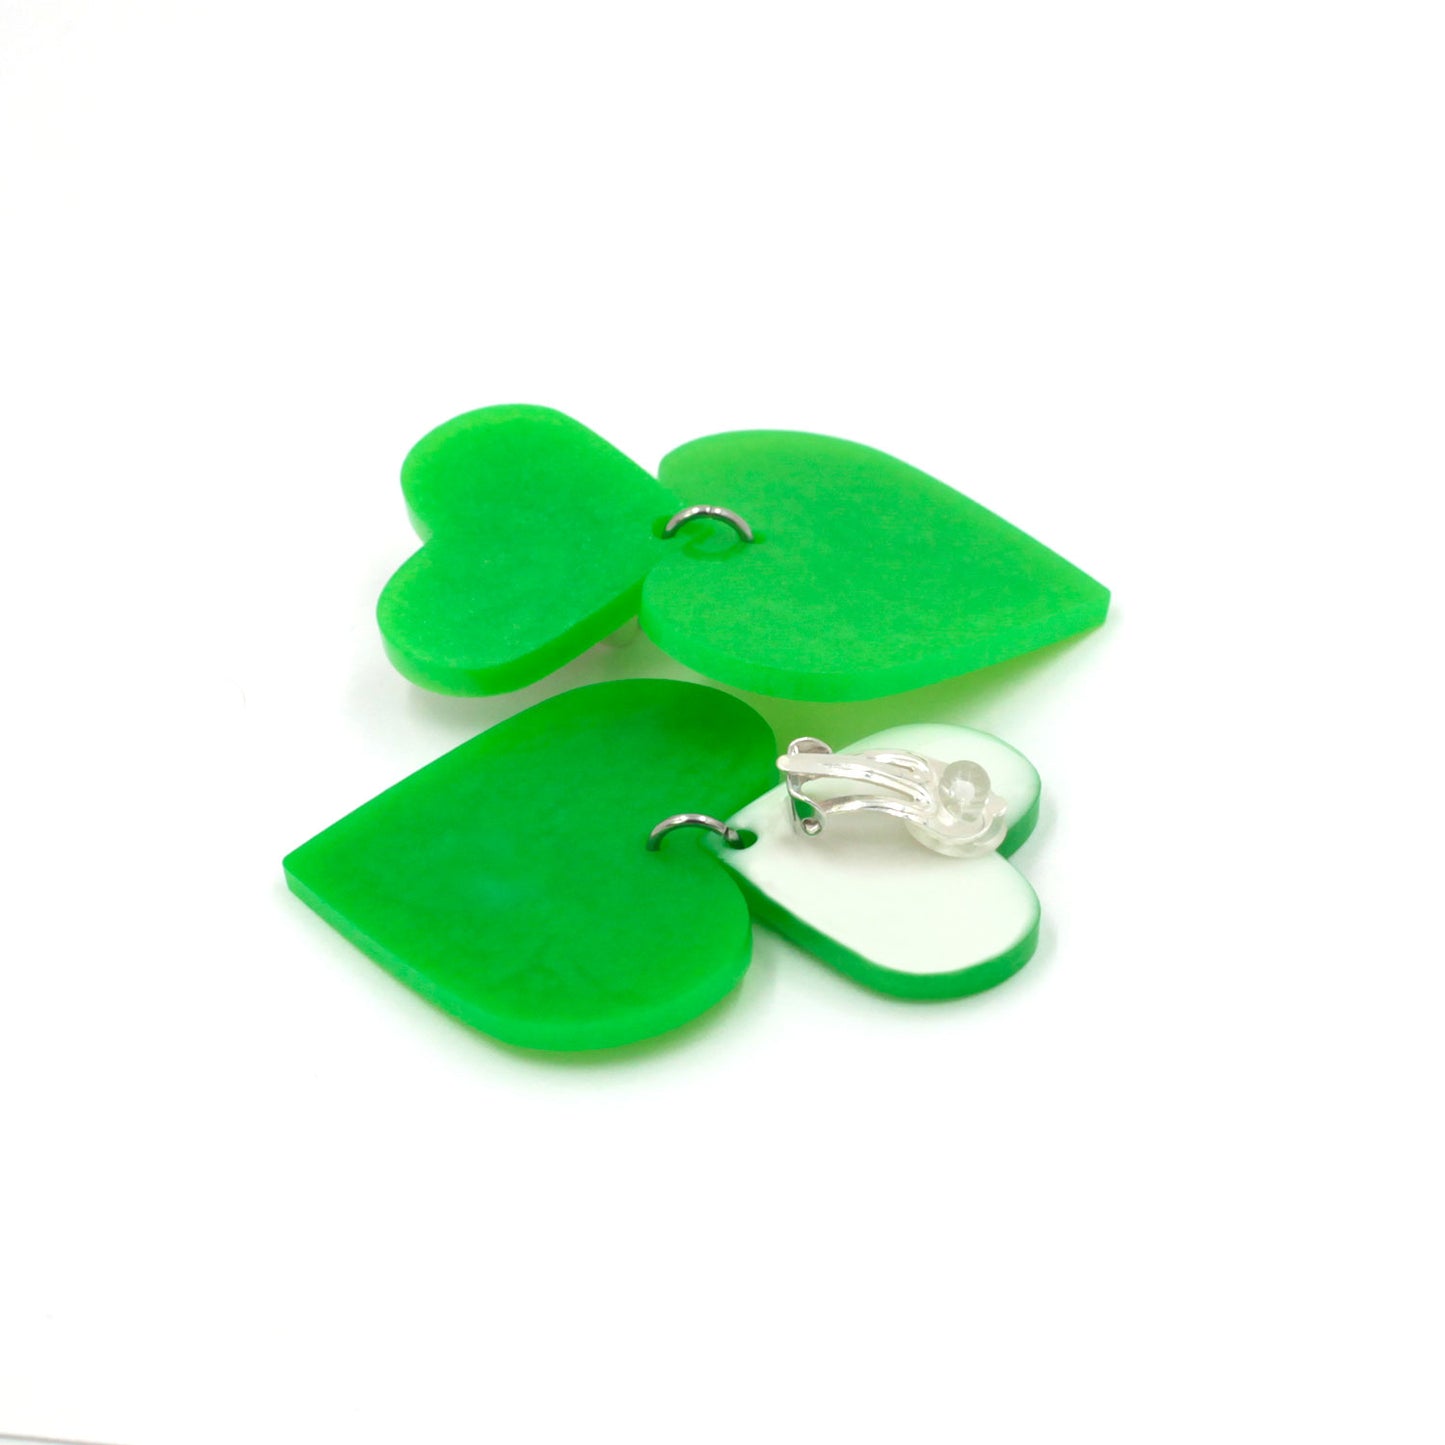 lime green hearts earrings on a white background. one is on its back, there is a clip on earring with a silicone pad protection. the top of the earring is white, the pendant heart is the same lime green from the front.